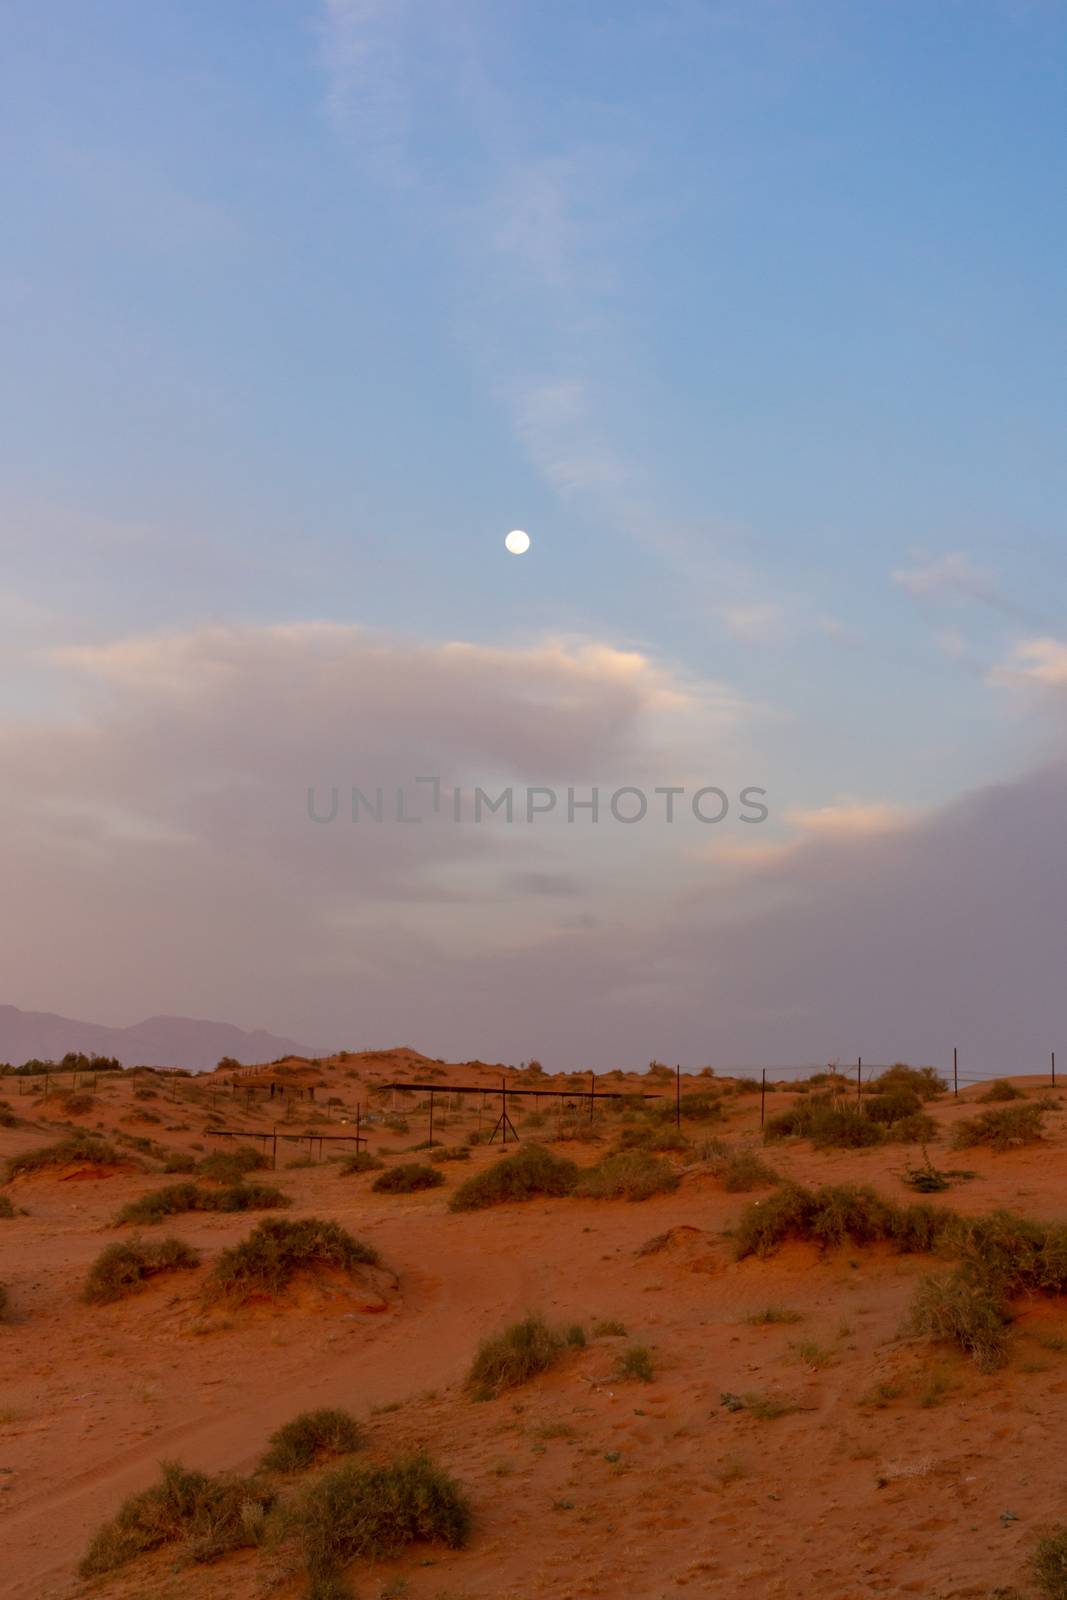 Evening sunset in the desert sand dunes of the United Arab Emira by kingmaphotos